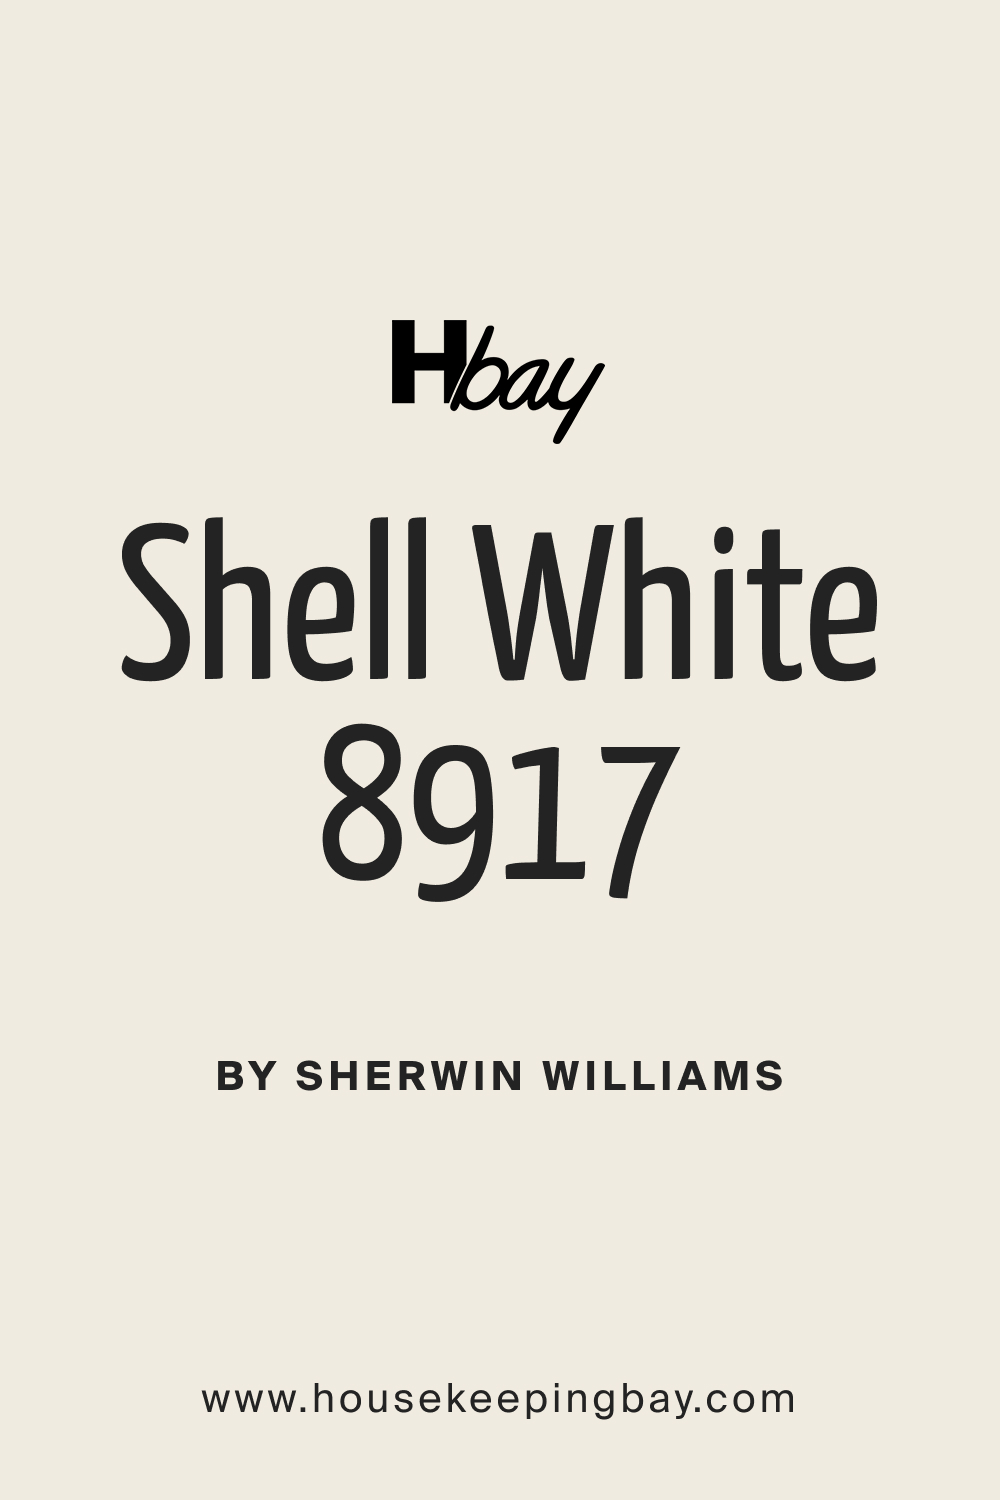 SW 8917 Shell White Paint Color by Sherwin Williams